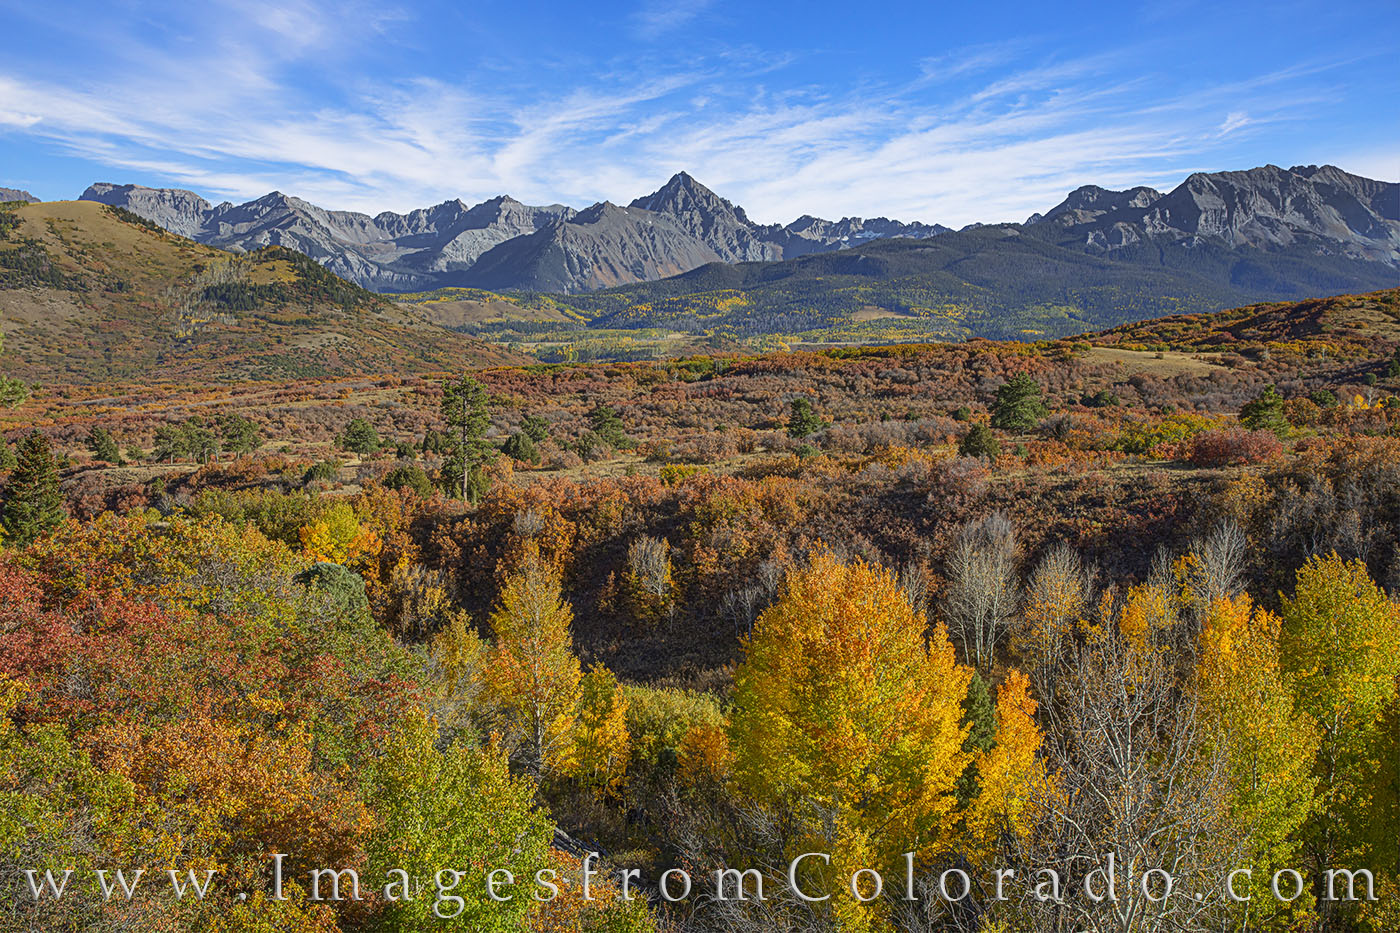 Fall colors fill the slopes leading up to the majestic Dallas Divide between Ridgway and Telluride. Scrub oak and aspen bring...